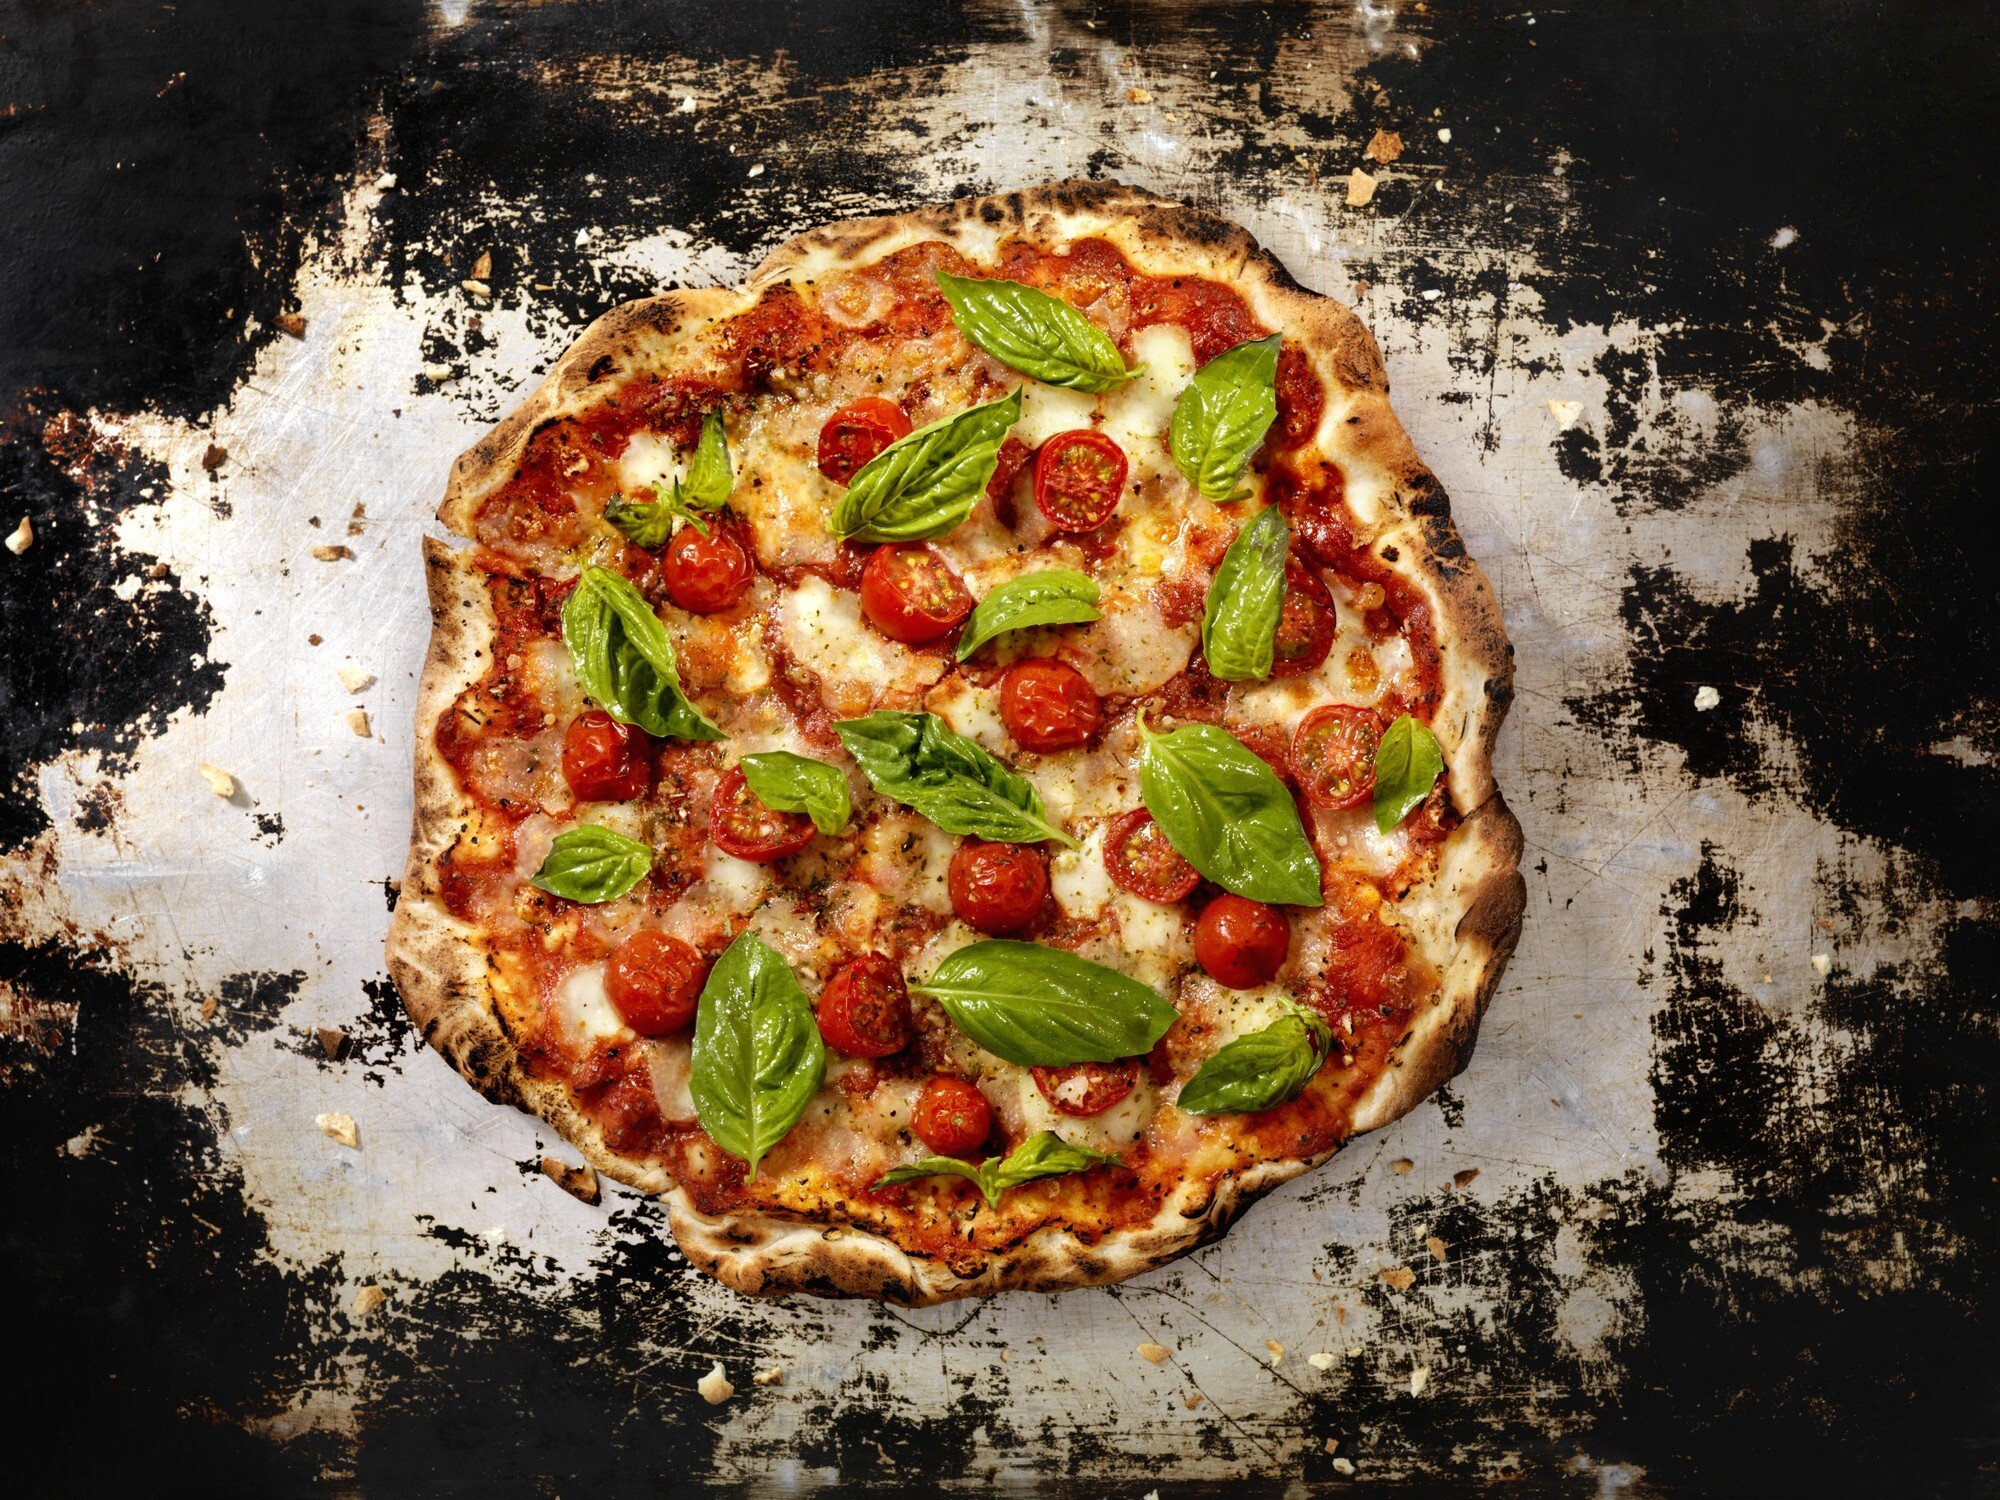 An authentic Neapolitan margherita pizza with mozzarella, tomatoes and basil. Teachers from Naples have shown disciples from Asia how to make the authentic pizza. Photo: Getty Images